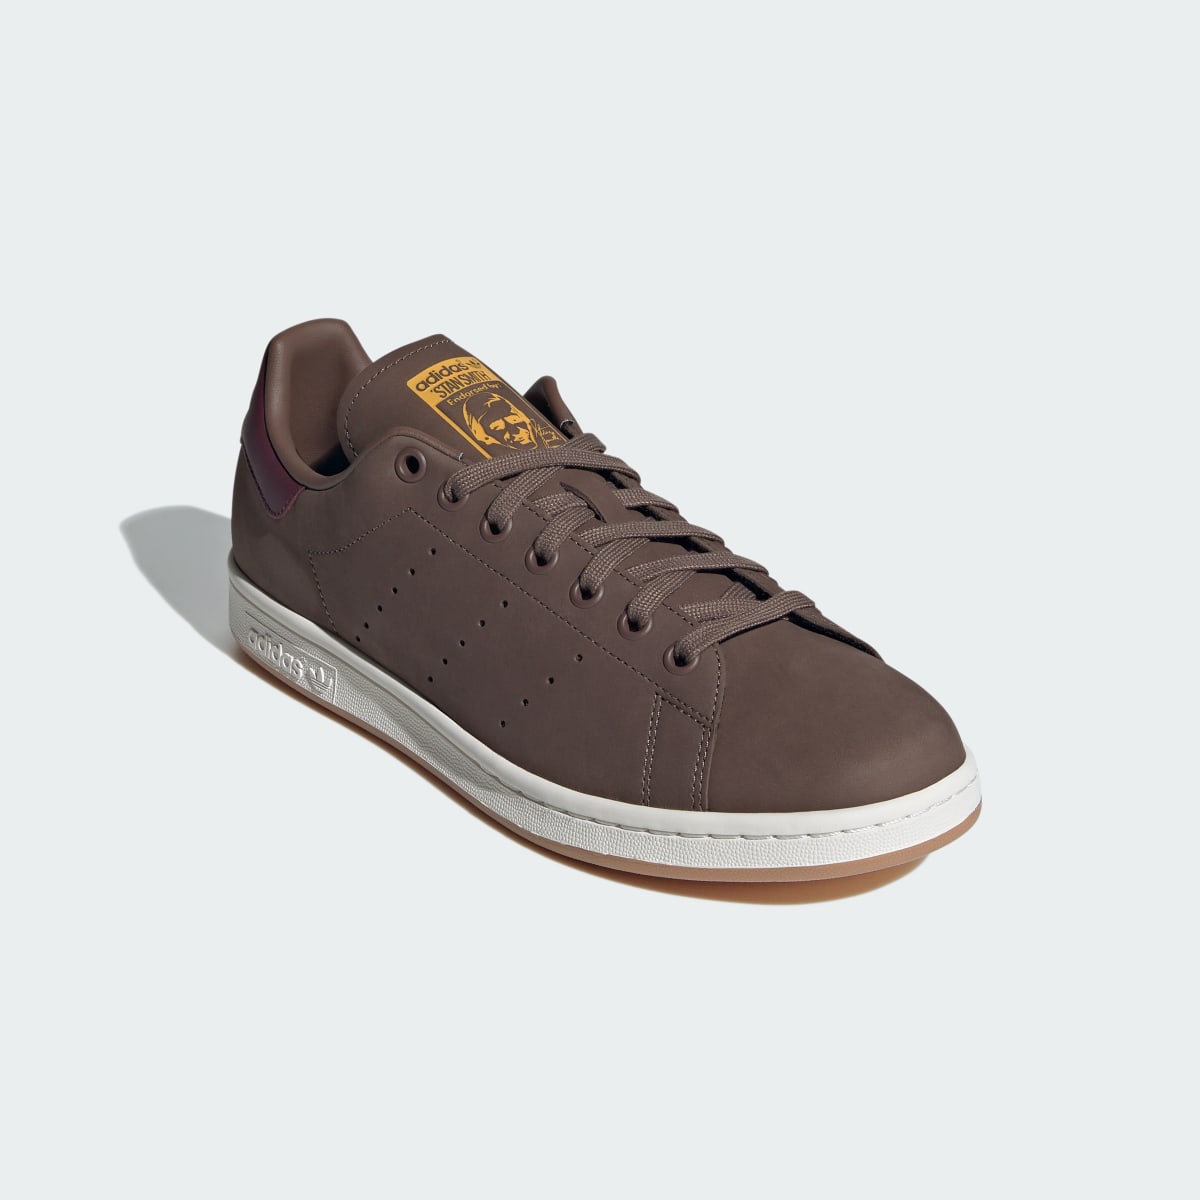 Adidas Stan Smith Shoes. 5